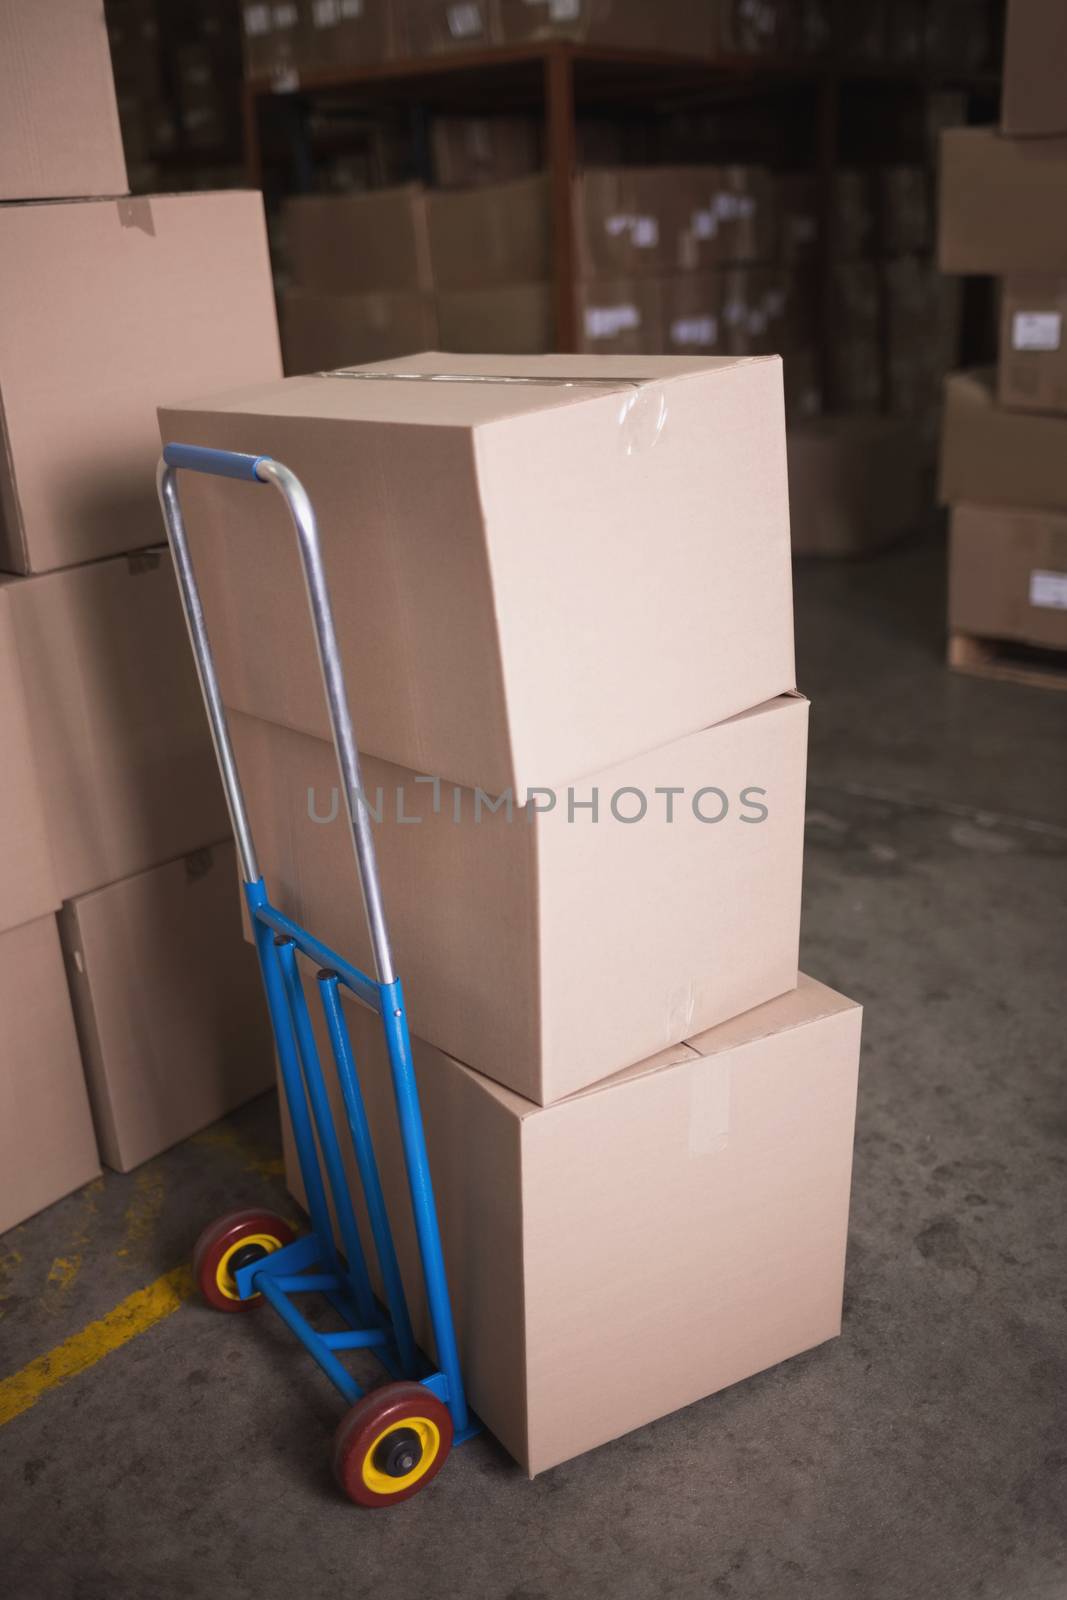 Boxes on trolley in warehouse by Wavebreakmedia